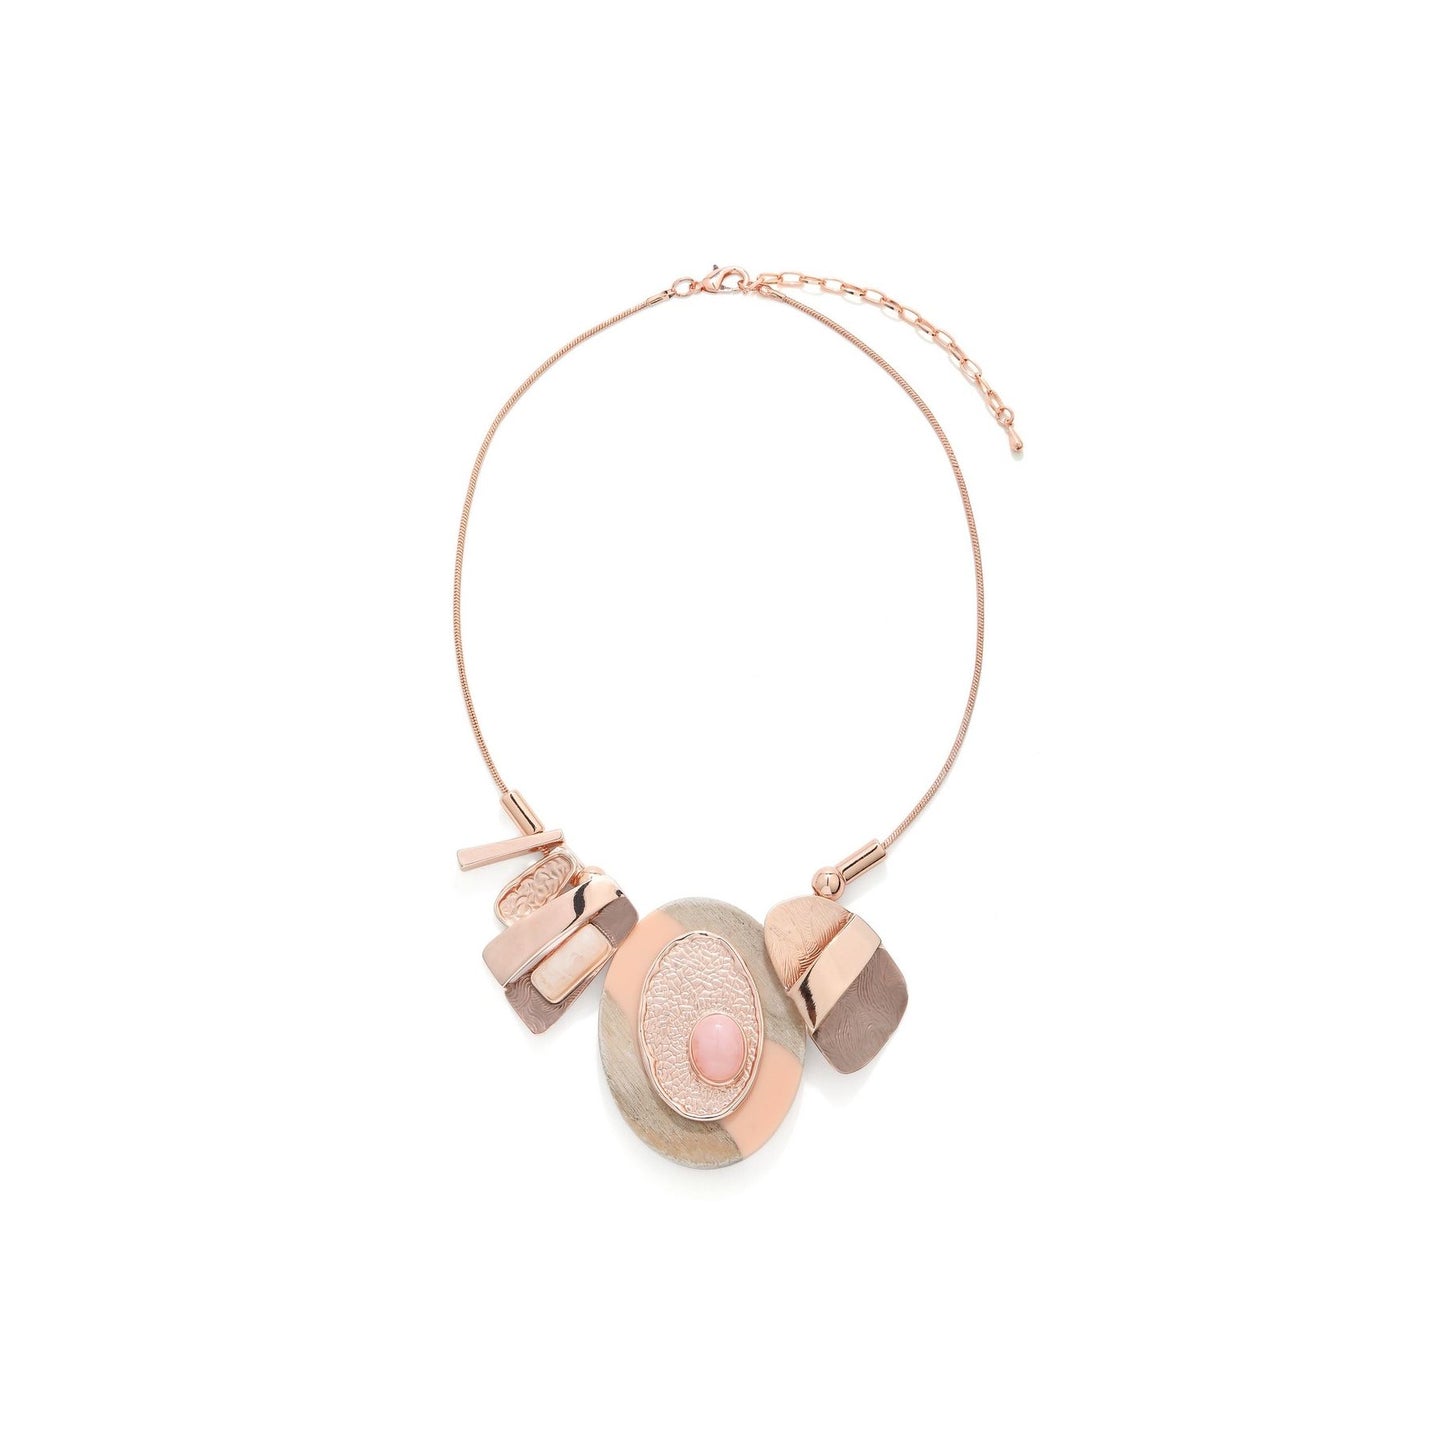 Rosie - Pink Stone Abstract Chunky Pendents on Rose Gold Adjustable Necklace from Frinkle